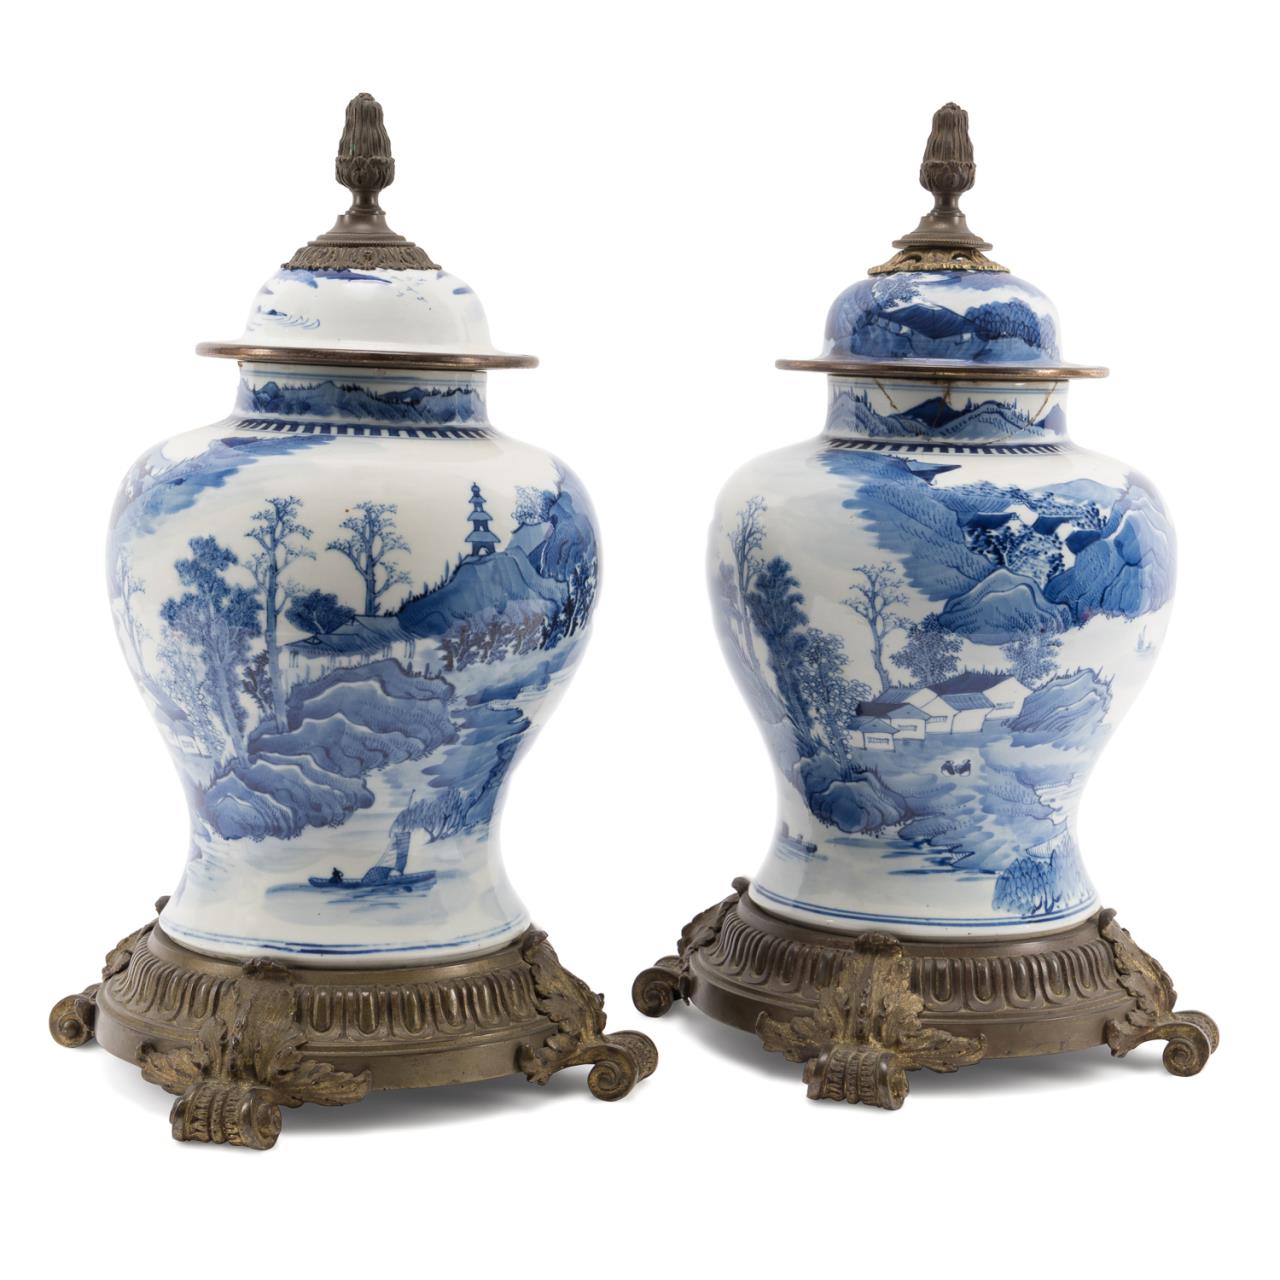 PAIR BRONZE MOUNTED CHINESE BLUE